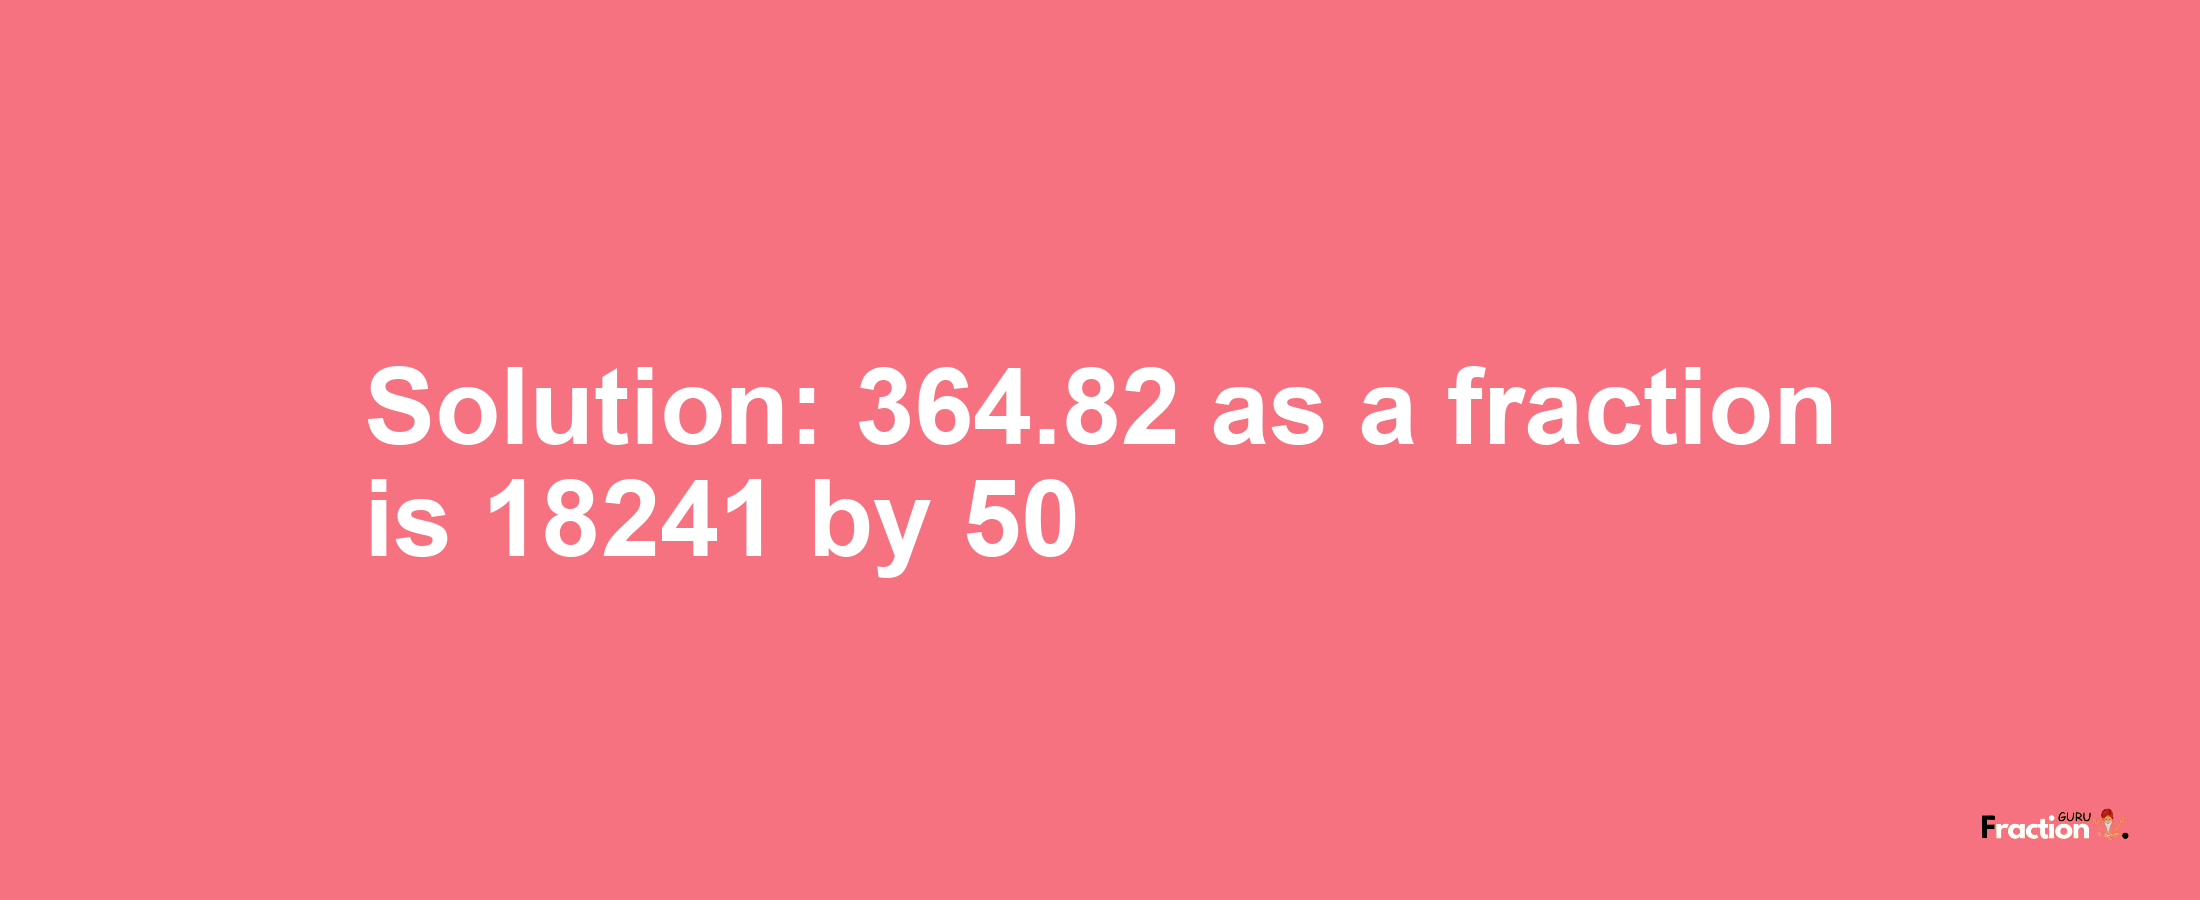 Solution:364.82 as a fraction is 18241/50